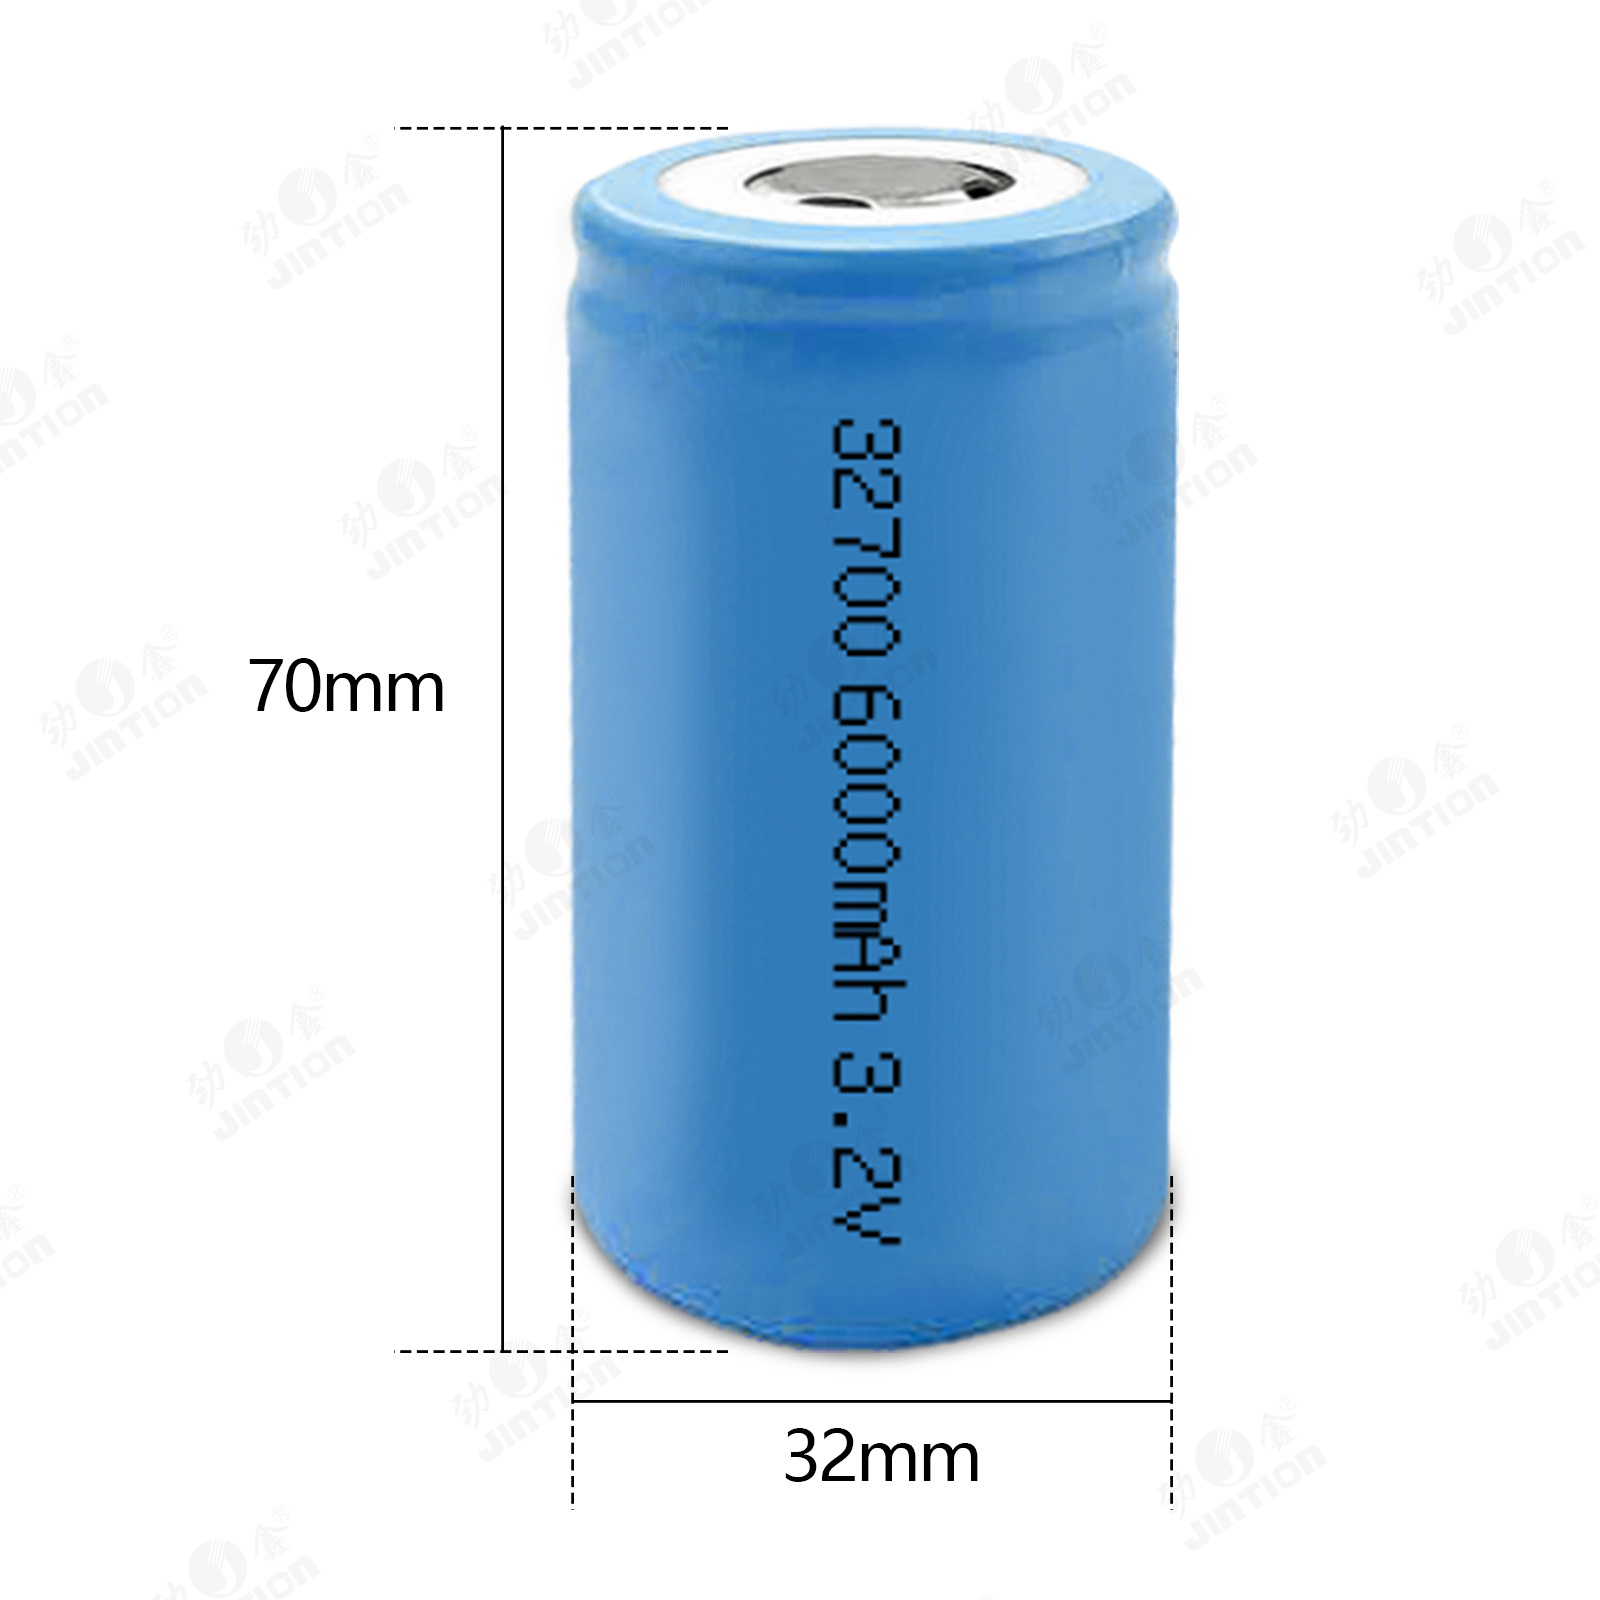 JINTION 32700 6000mah 3.2v lithium ion batteries cell 32700 high capacity 32700 lithium ion battery Long cycle lifepo4 battery